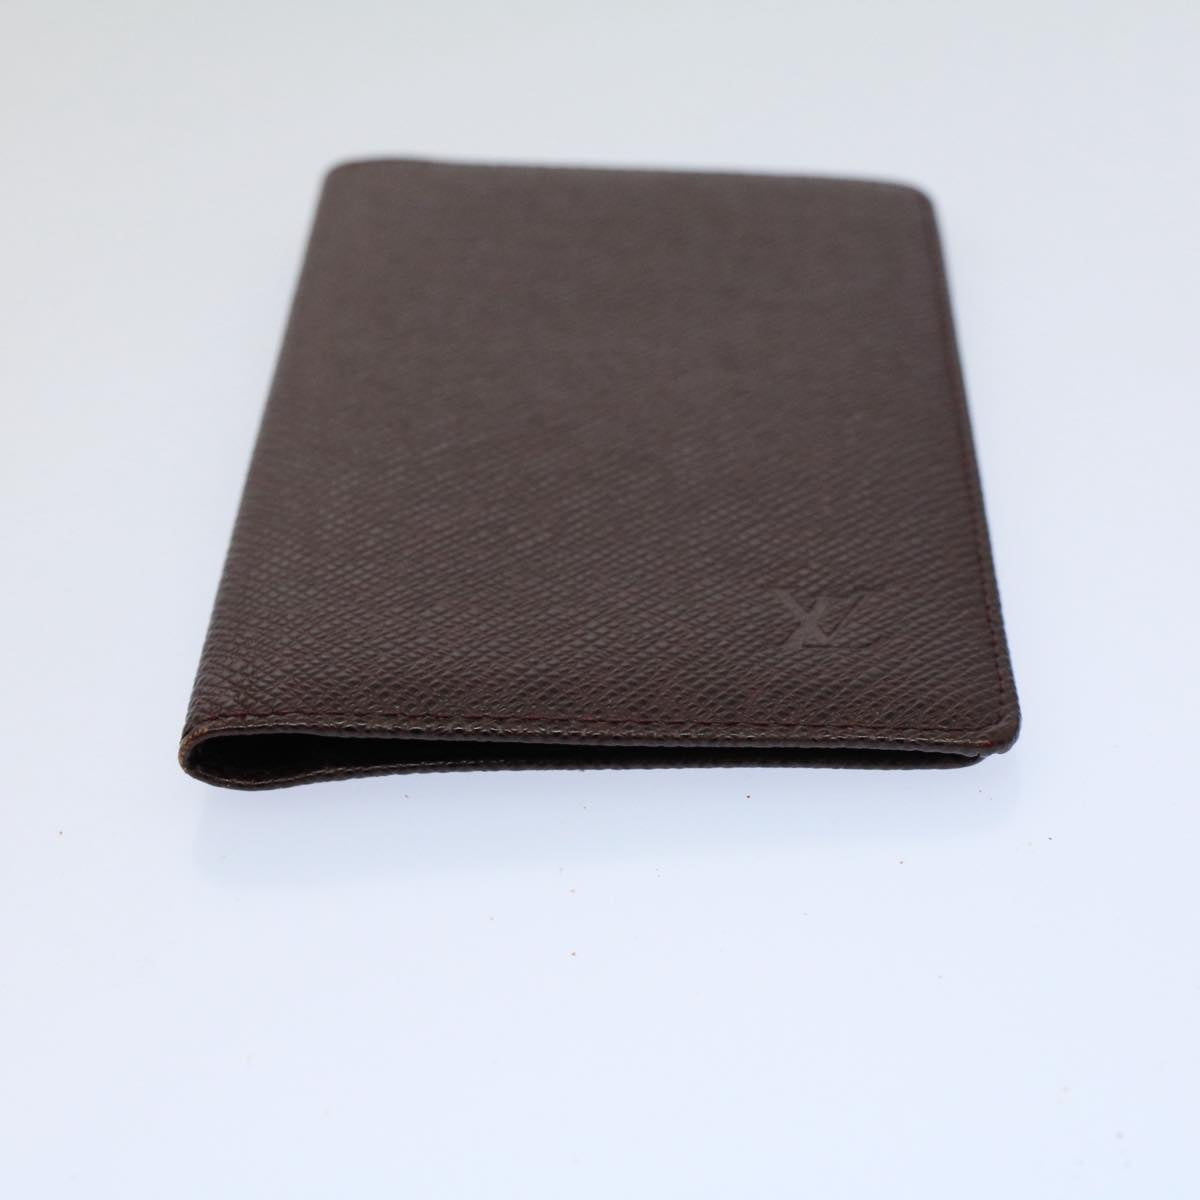 LOUIS VUITTON Taiga Leather Agenda Poche Note Cover Grizzly R20430 Auth bs9455